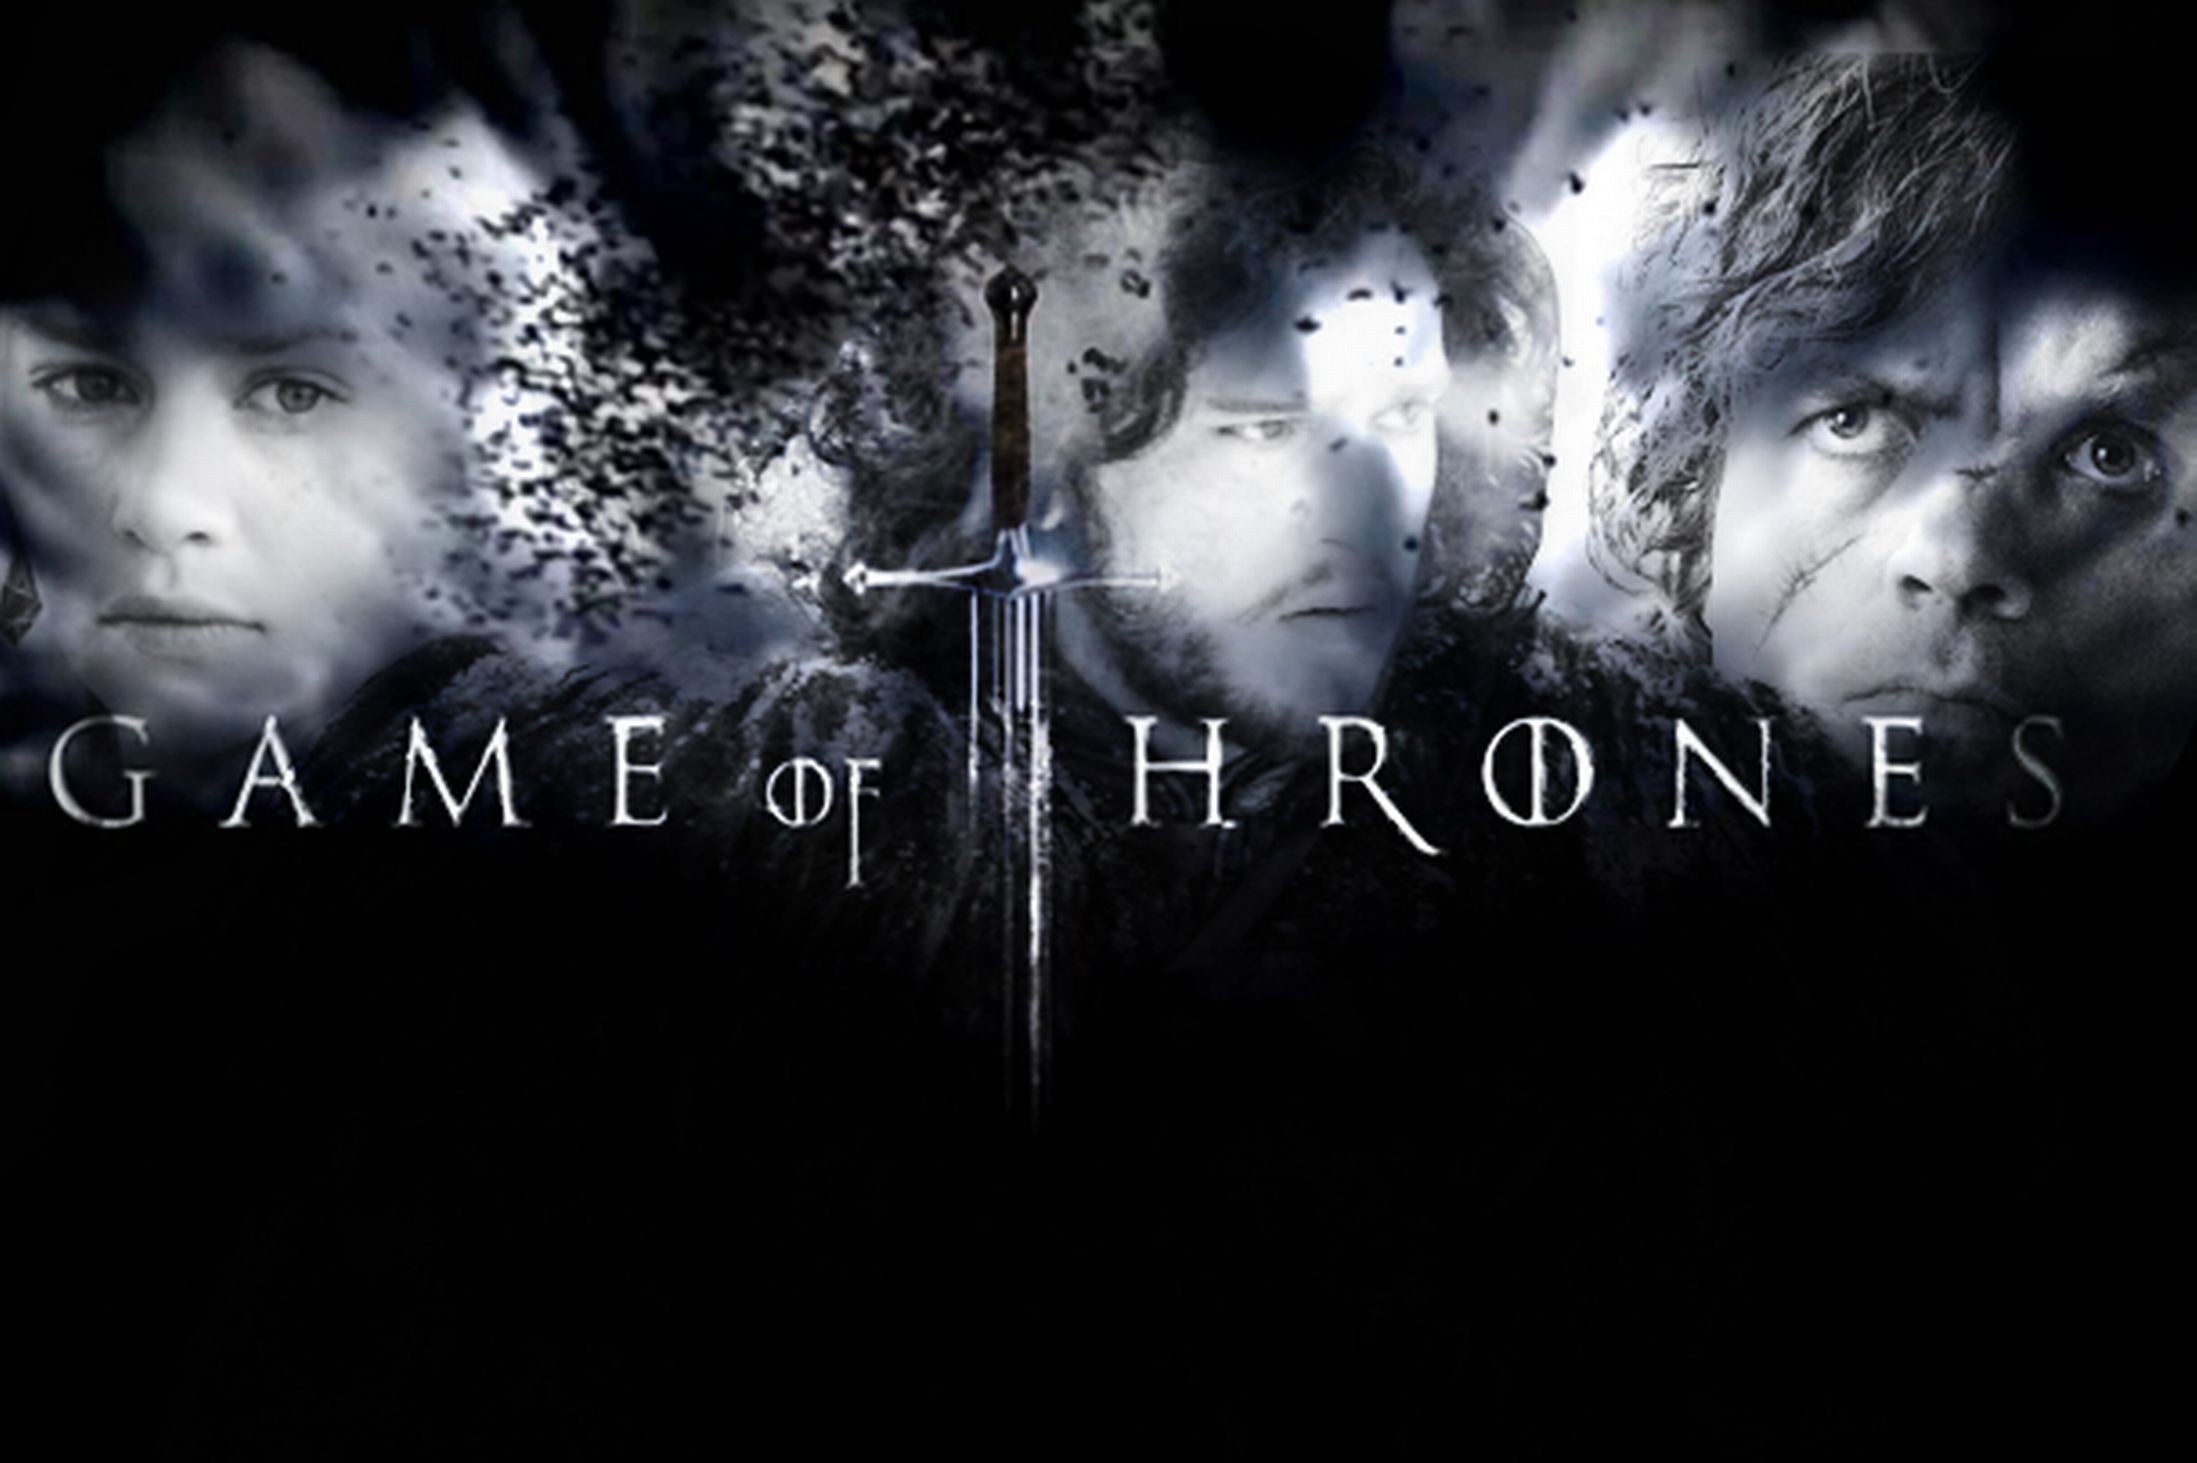 game of thrones ipad wallpaper,darkness,text,font,black and white,graphic design